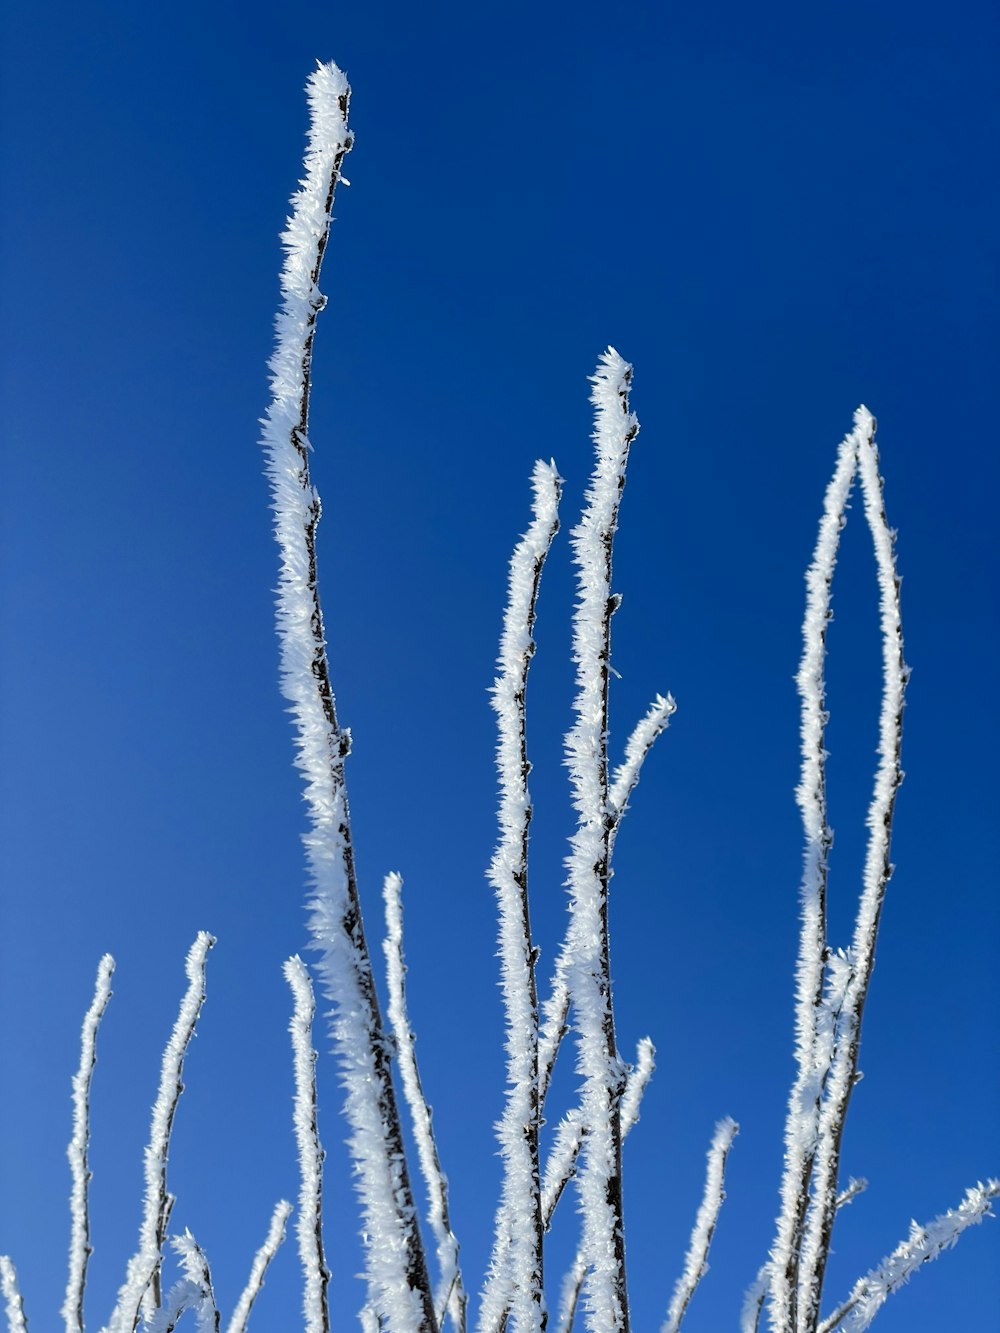 a plant covered in ice against a blue sky